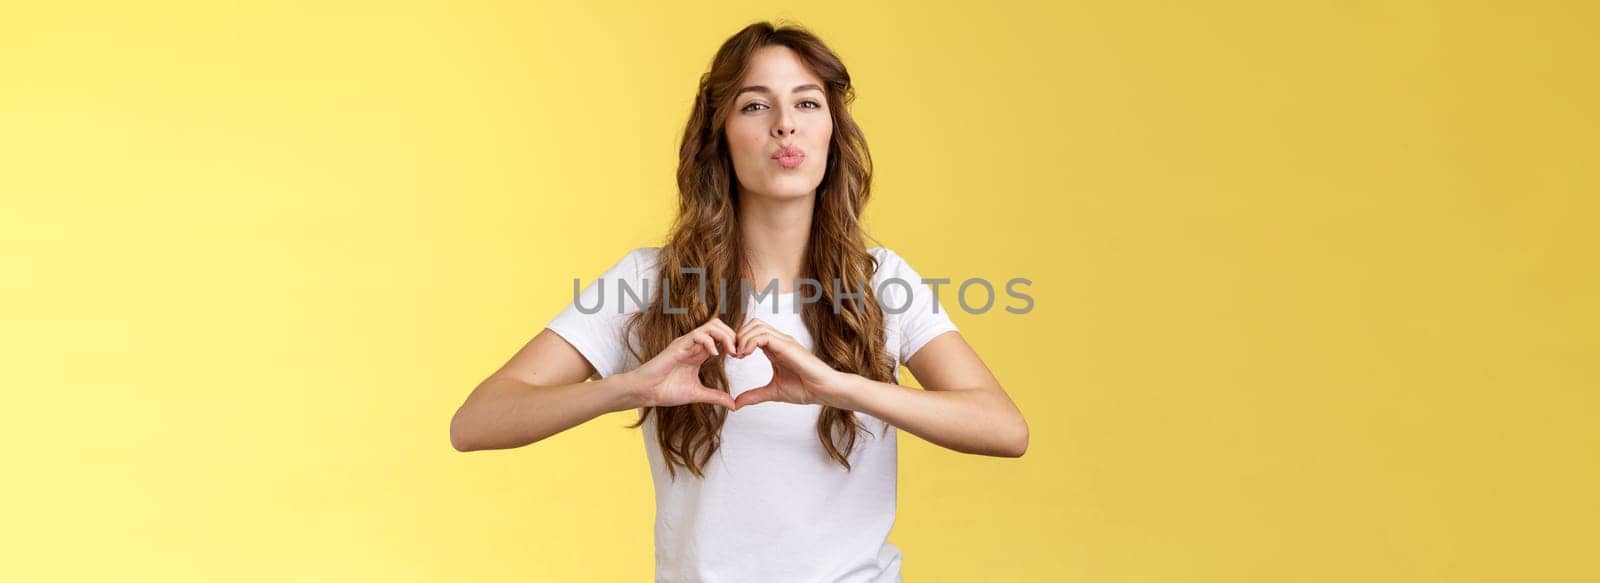 Passionate sensual attractive girlfriend express love sympathy show heart sign near chest folding lips kiss sending muah camera look admiration confess deep romantic feelings adore you. Lifestyle.